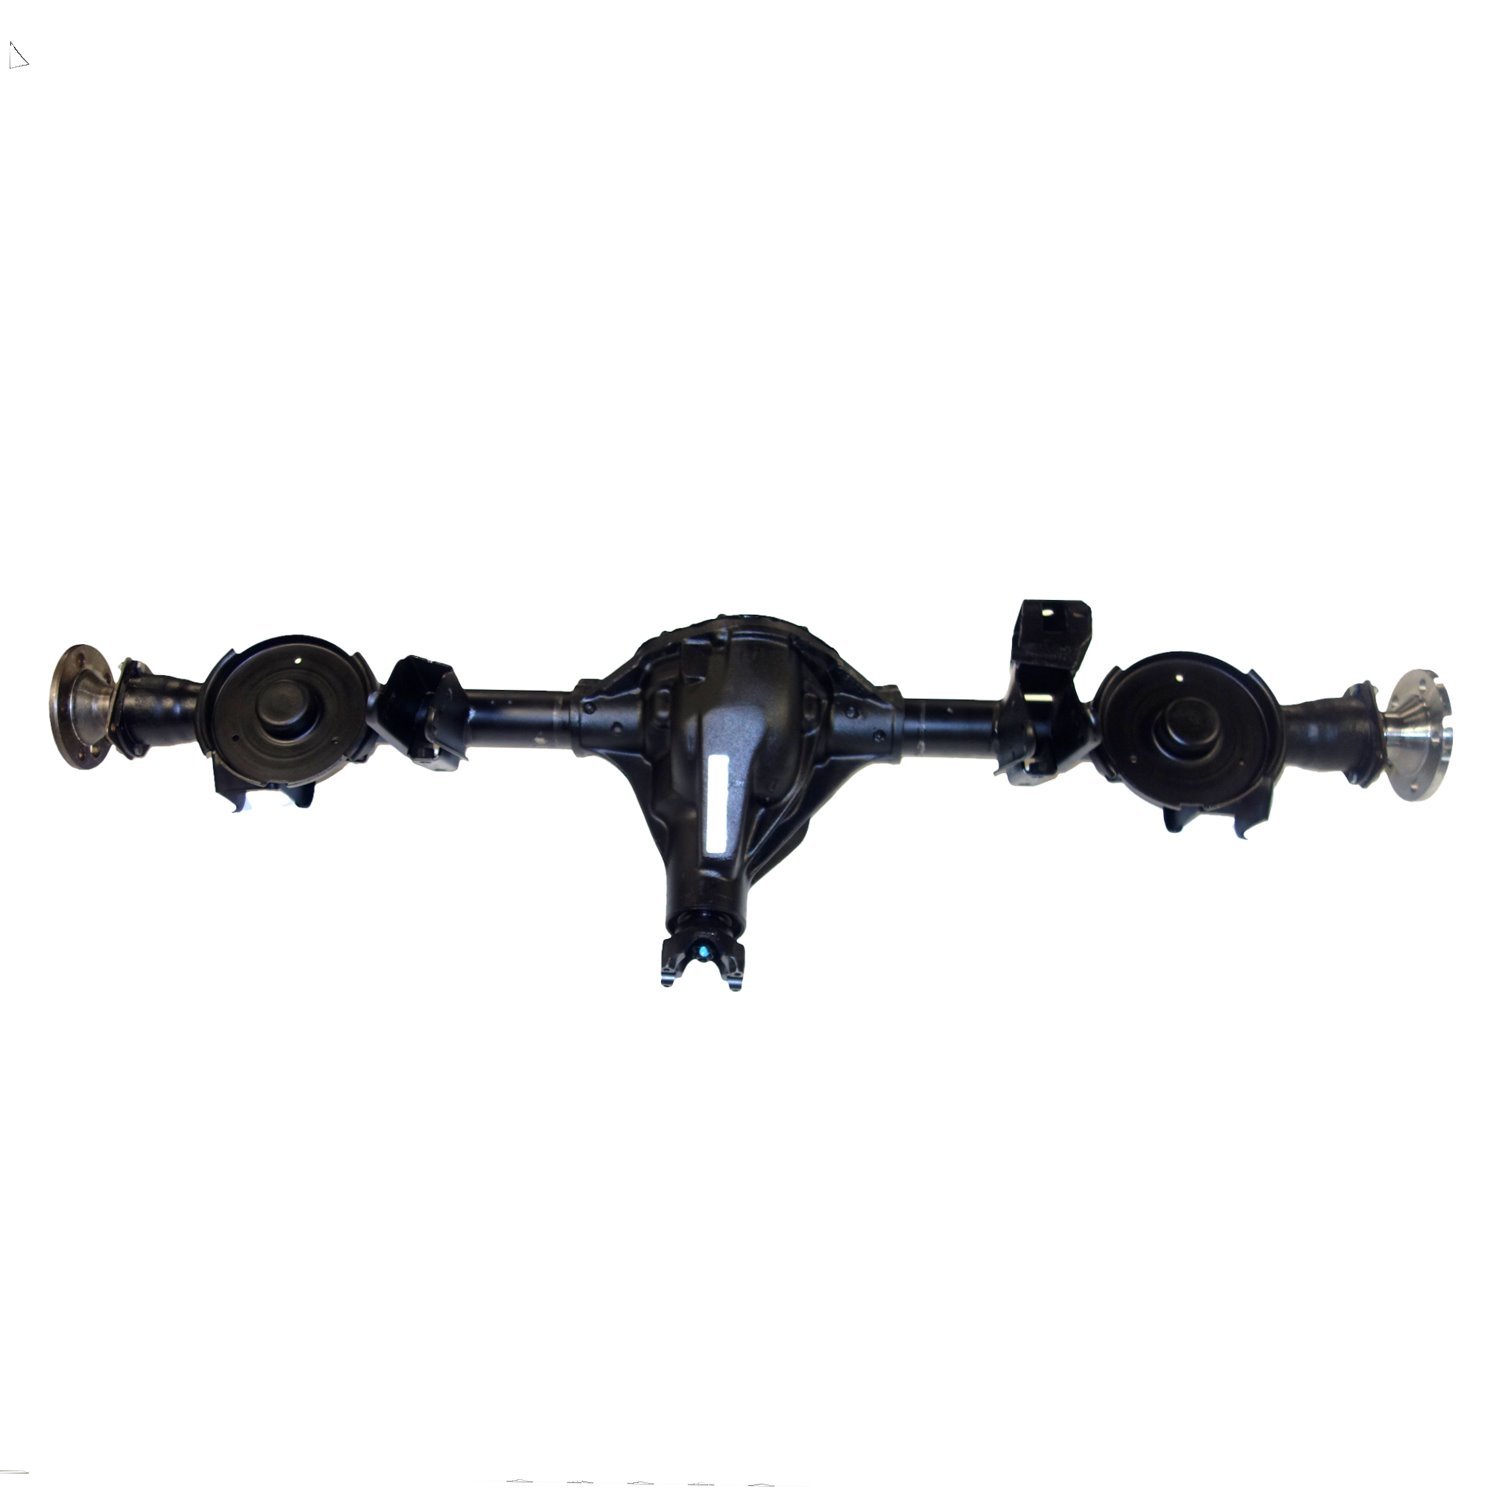 Remanufactured Complete Axle Assy for Dana 44 99-04 Grand Cherokee 3.91 with Quadra Drive